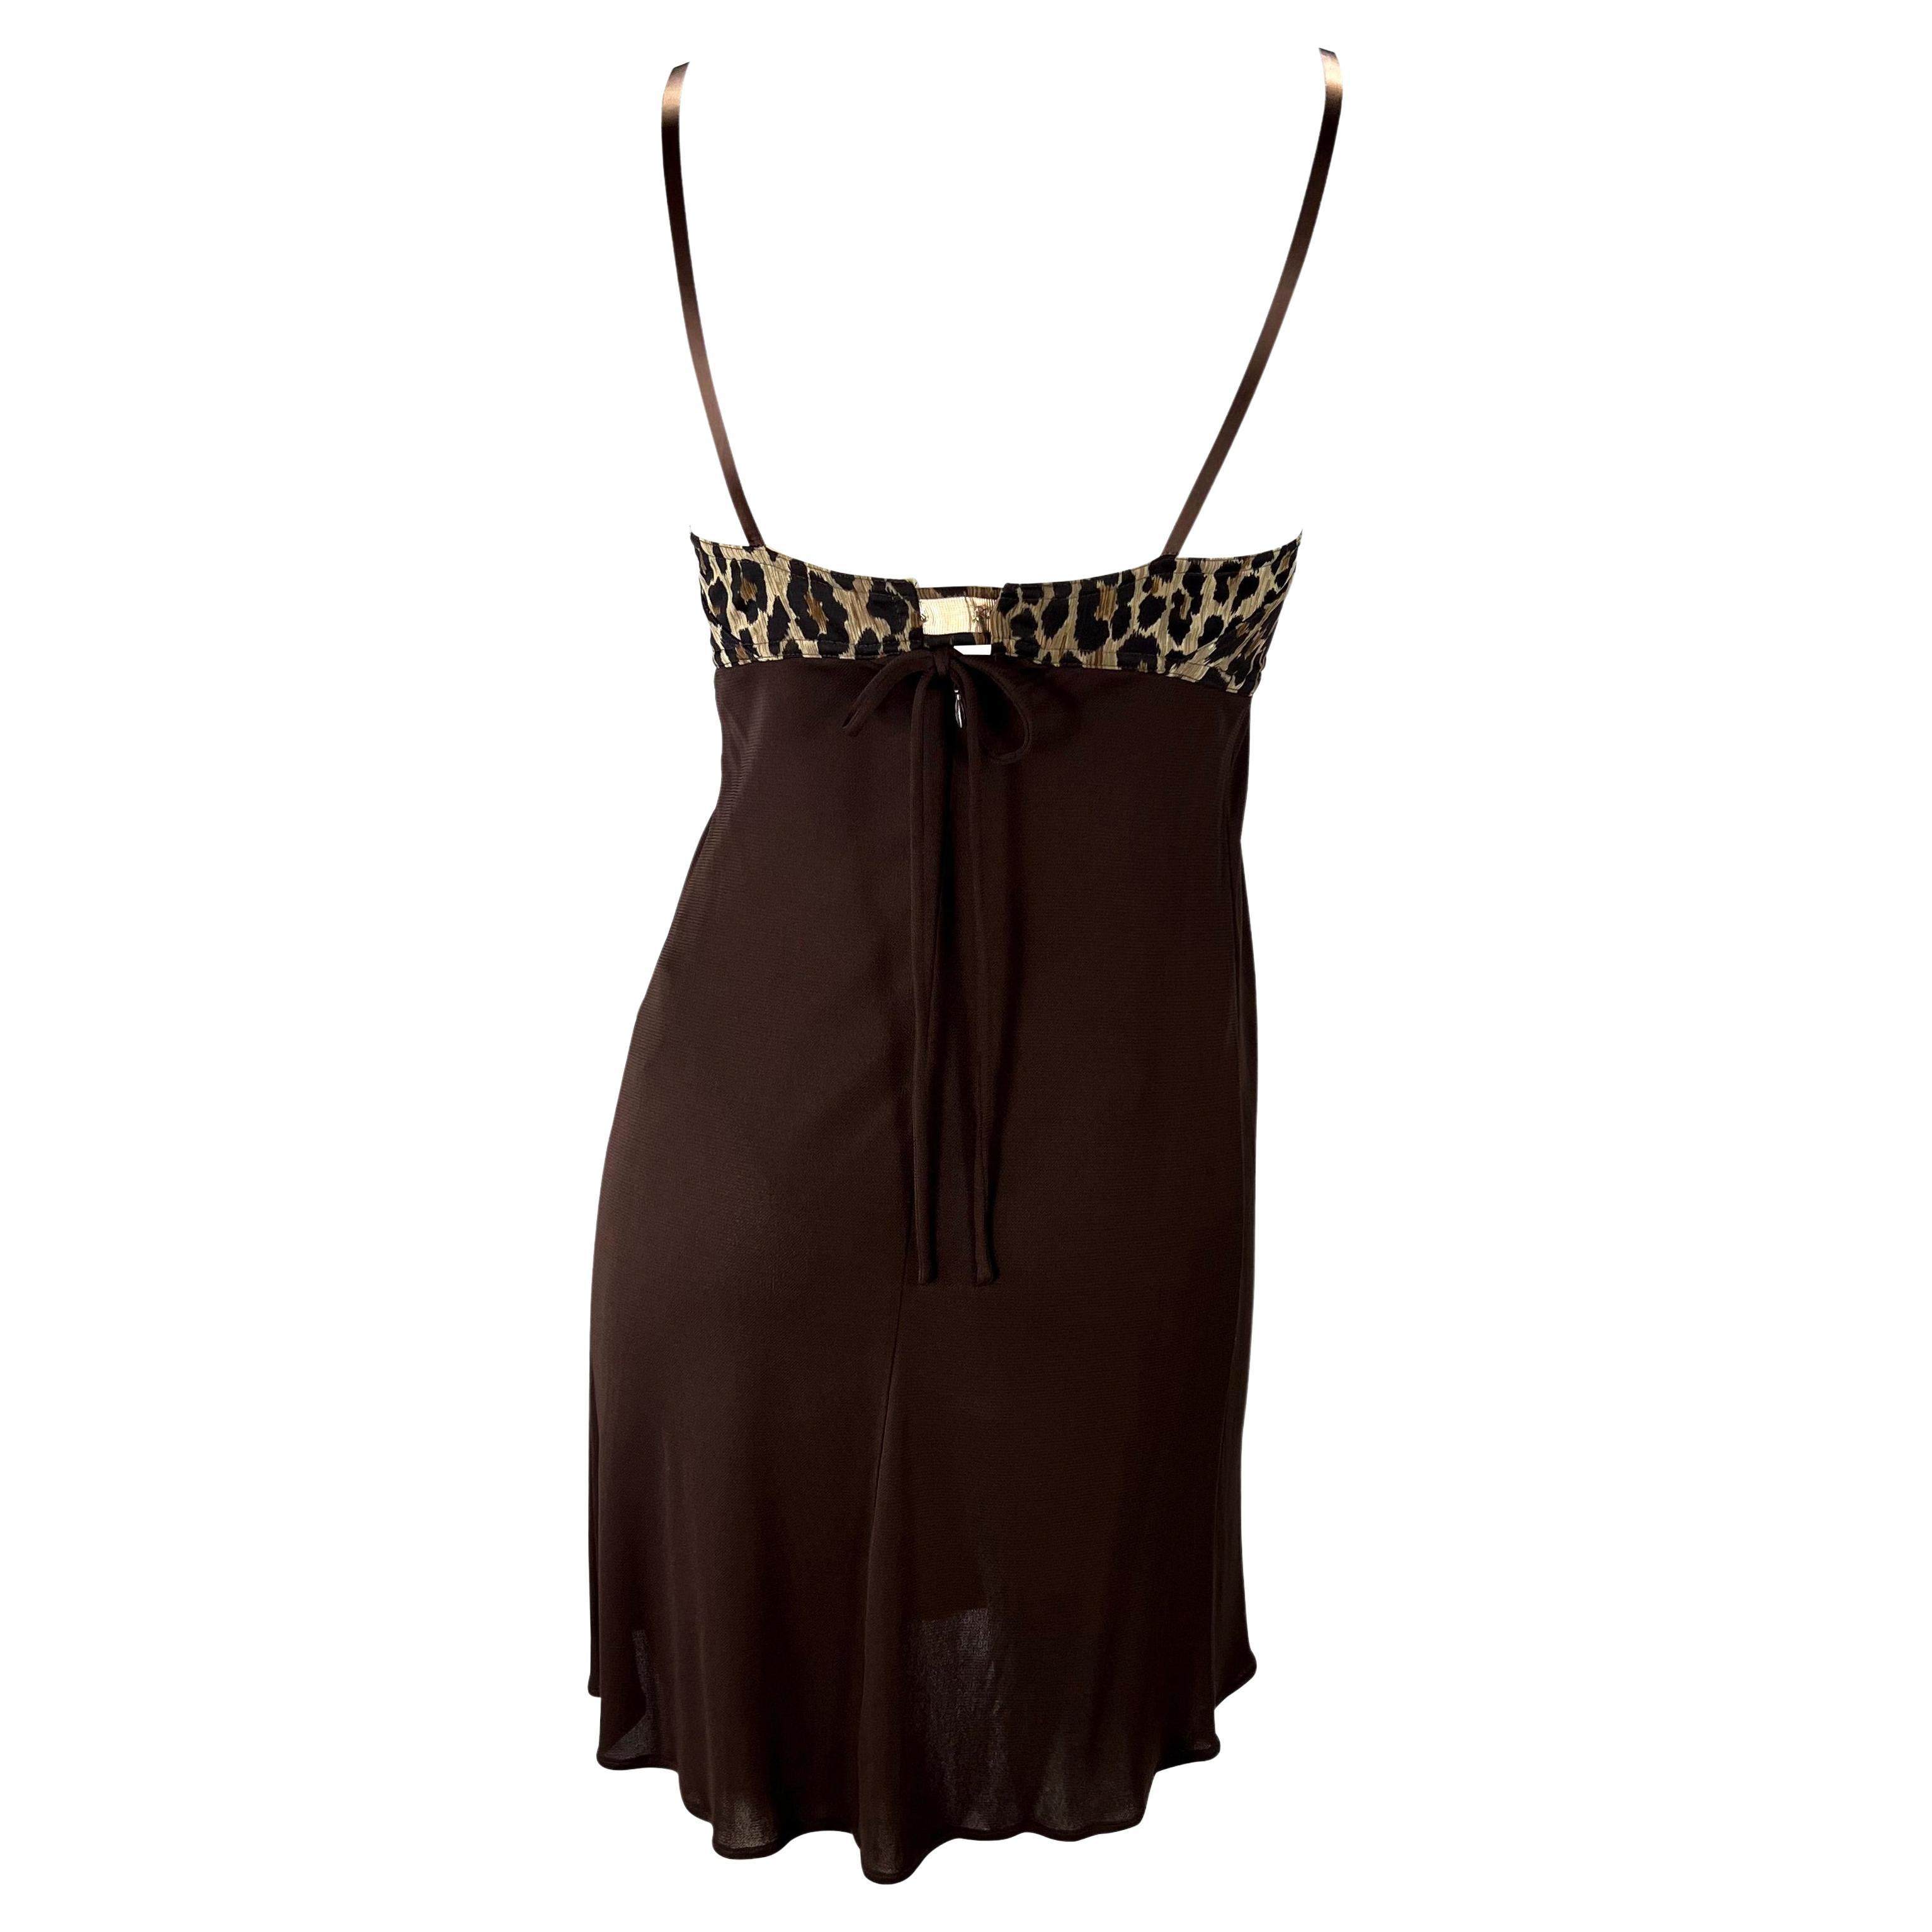 S/S 1997 Dolce & Gabbana Cheetah Print Sheer Brown Bustier Slip Dress In Good Condition For Sale In West Hollywood, CA